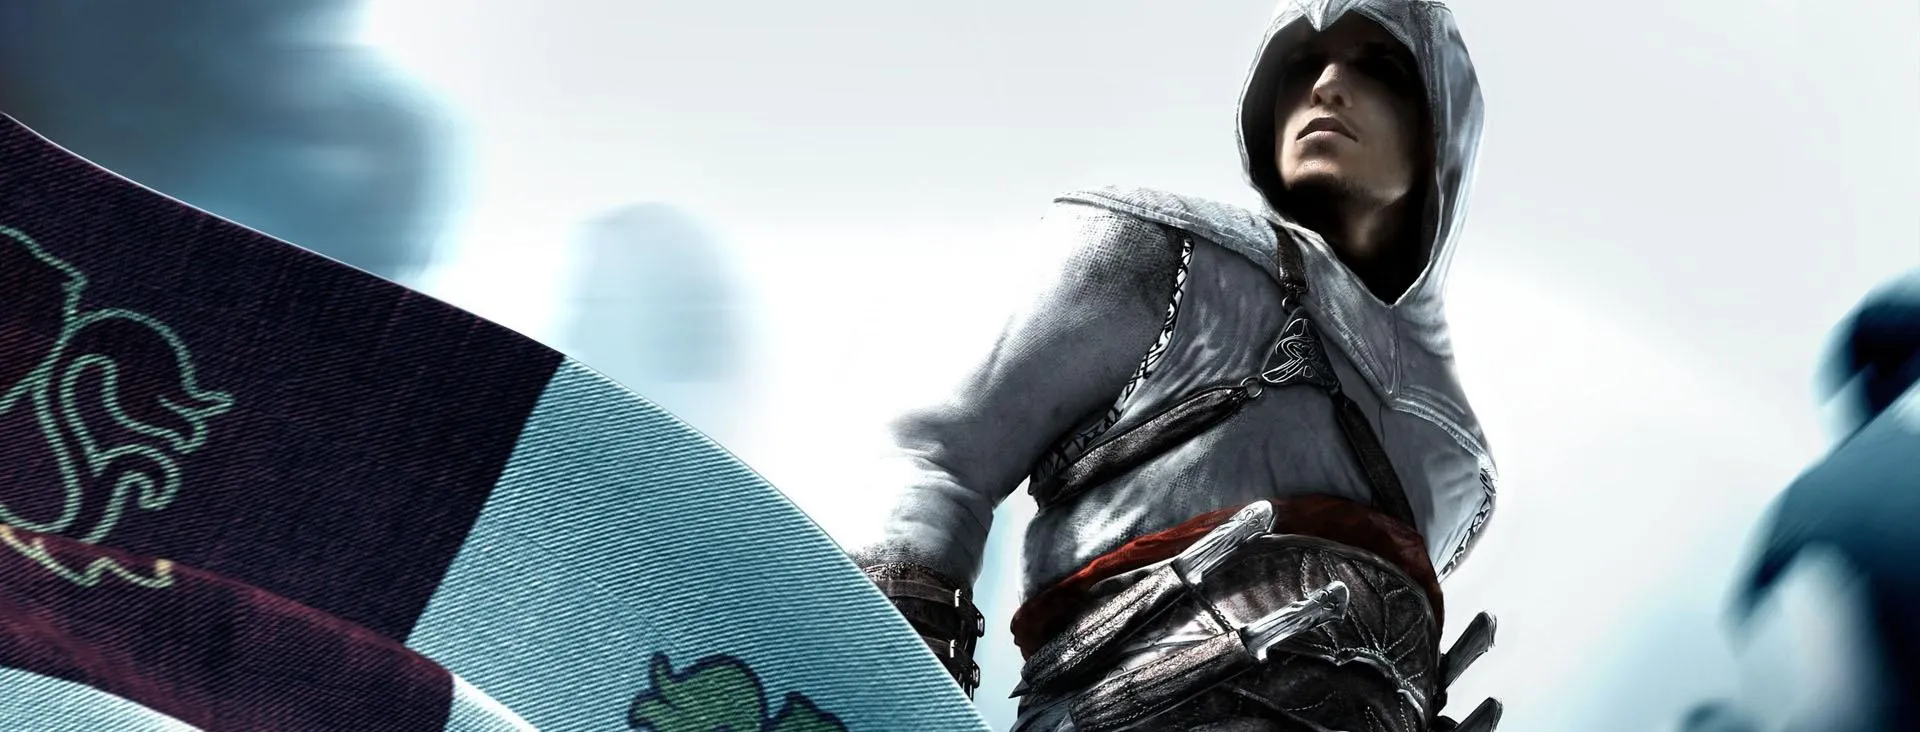 Assassin's Creed Deserves a Remake for the PS5 and Xbox Series X